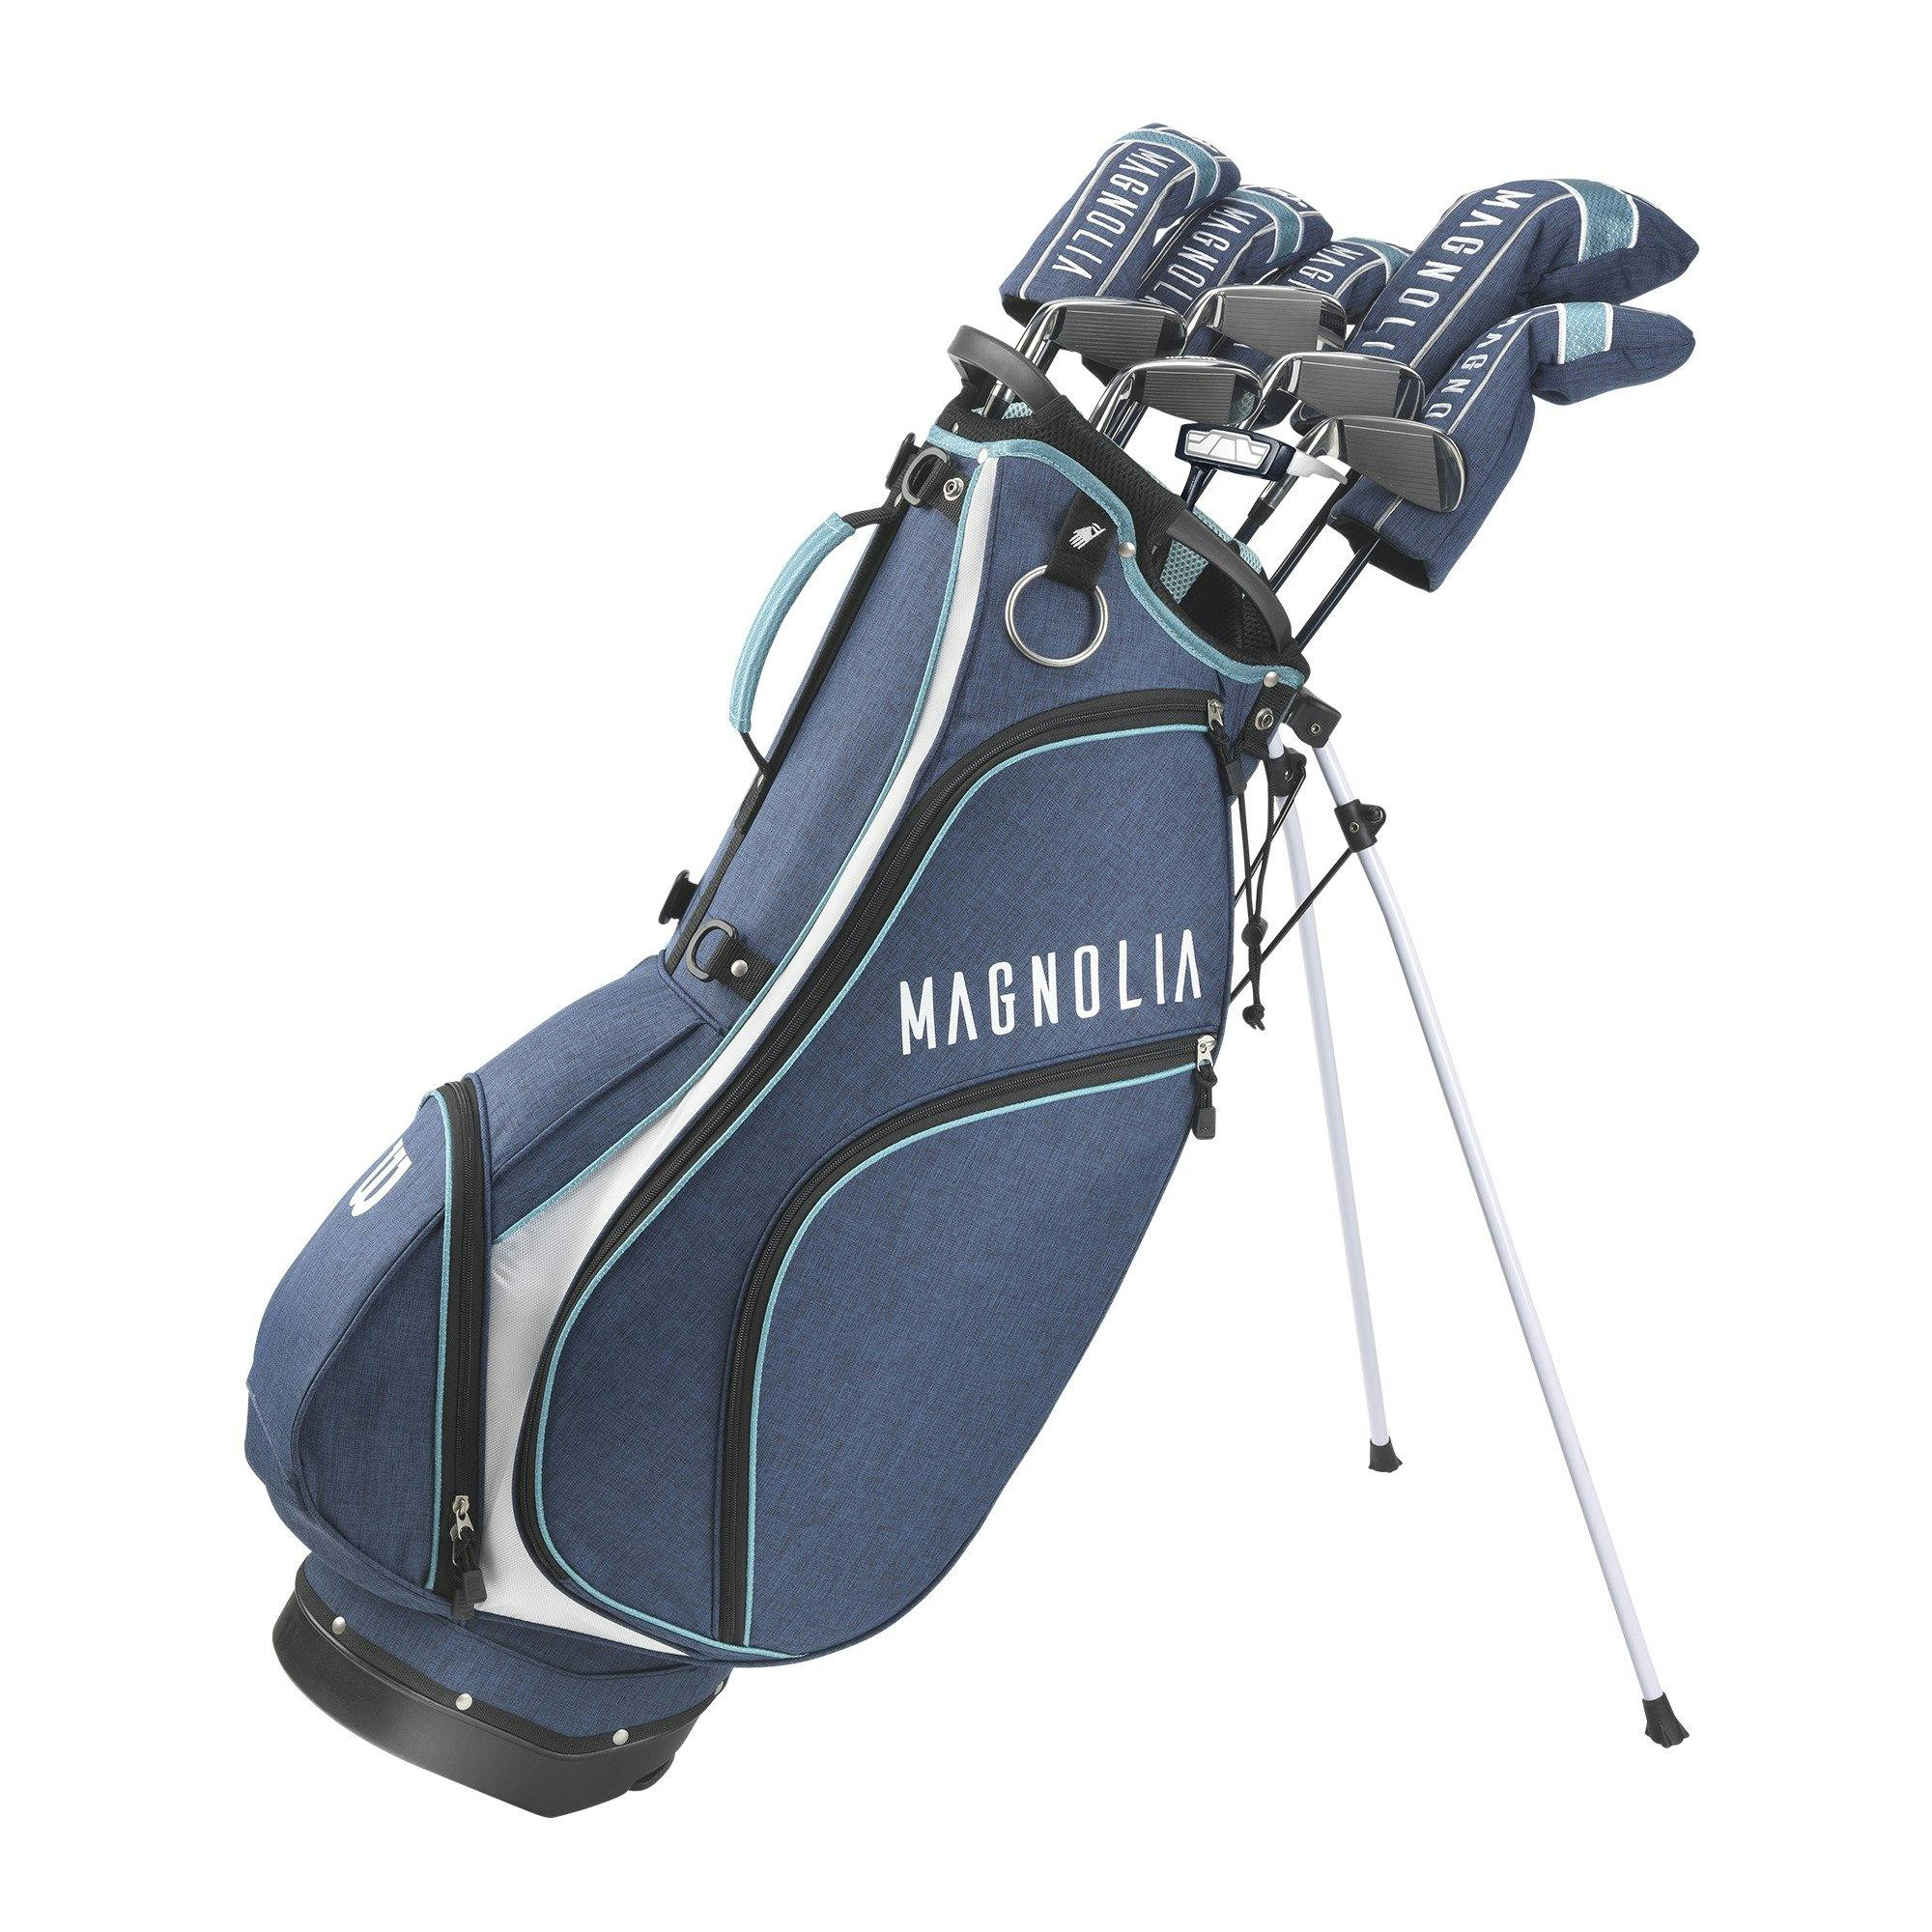 Wilson Women's Magnolia Complete Set with Carry Bag · Right handed · Graphite · Ladies · Tall · Navy